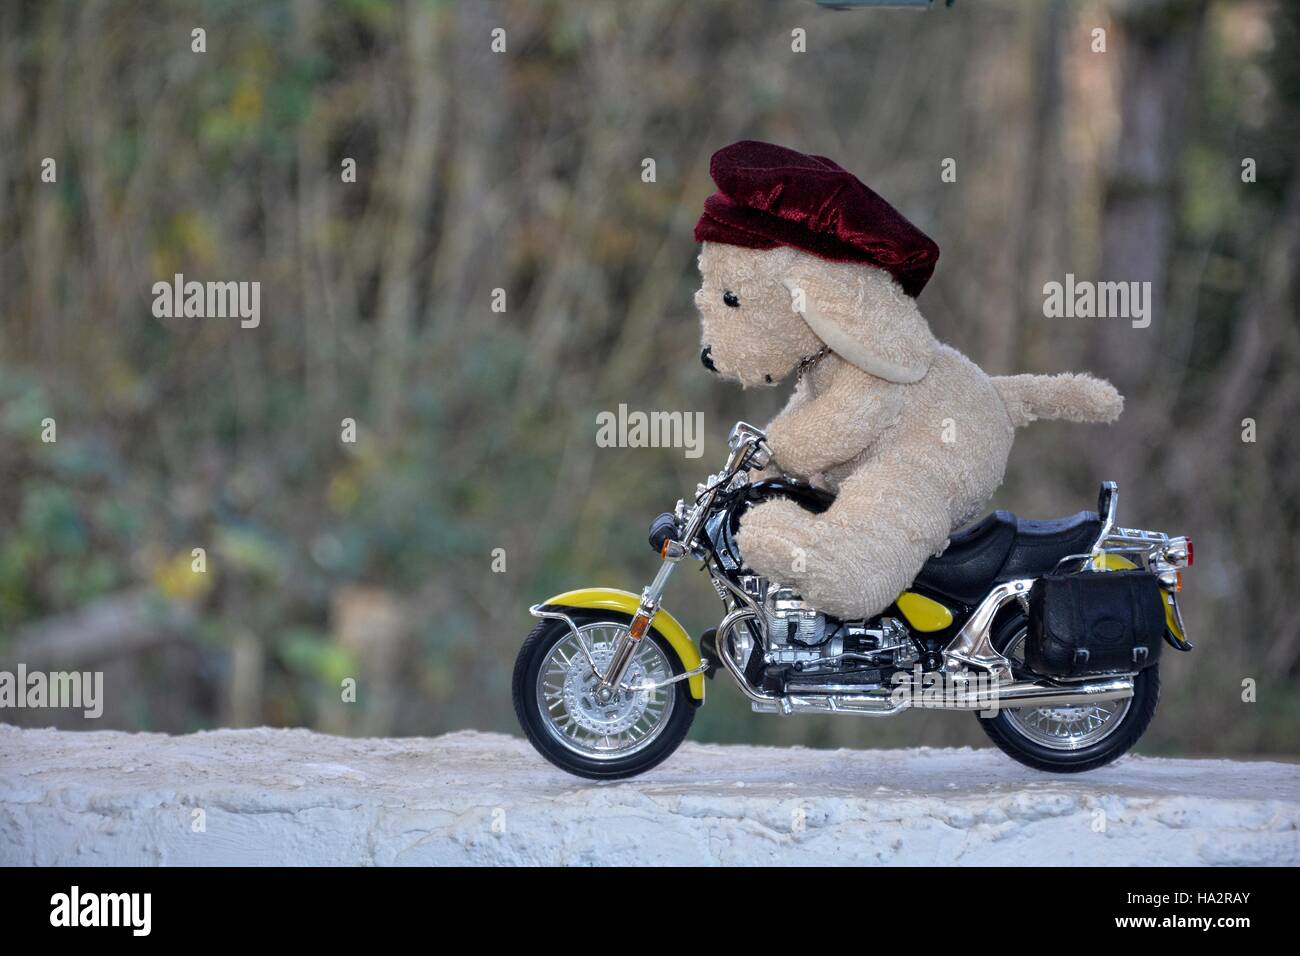 Dog soft toy with cap sits on motorcycle outside Stock Photo